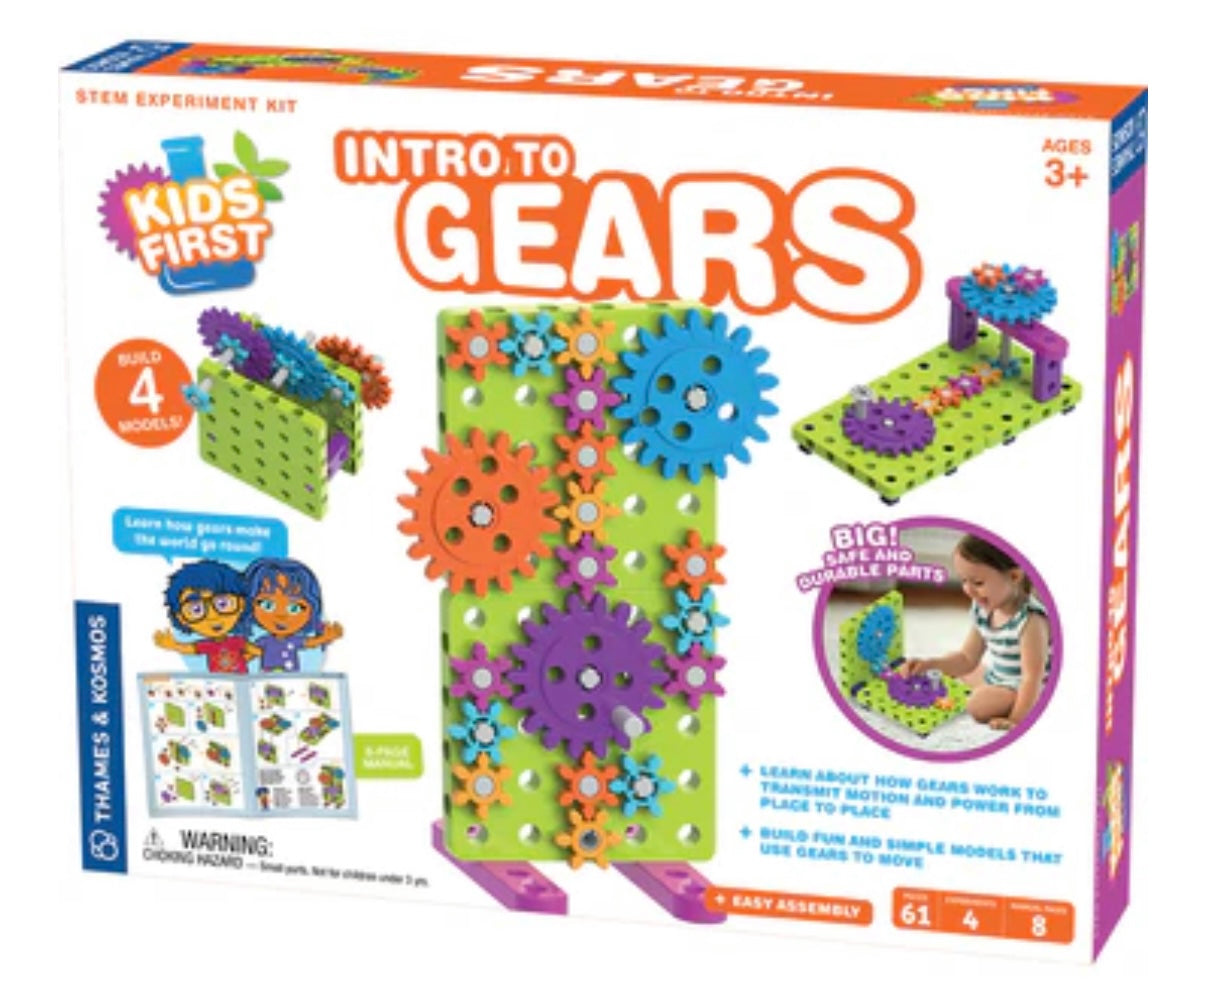 INTRO TO GEARS